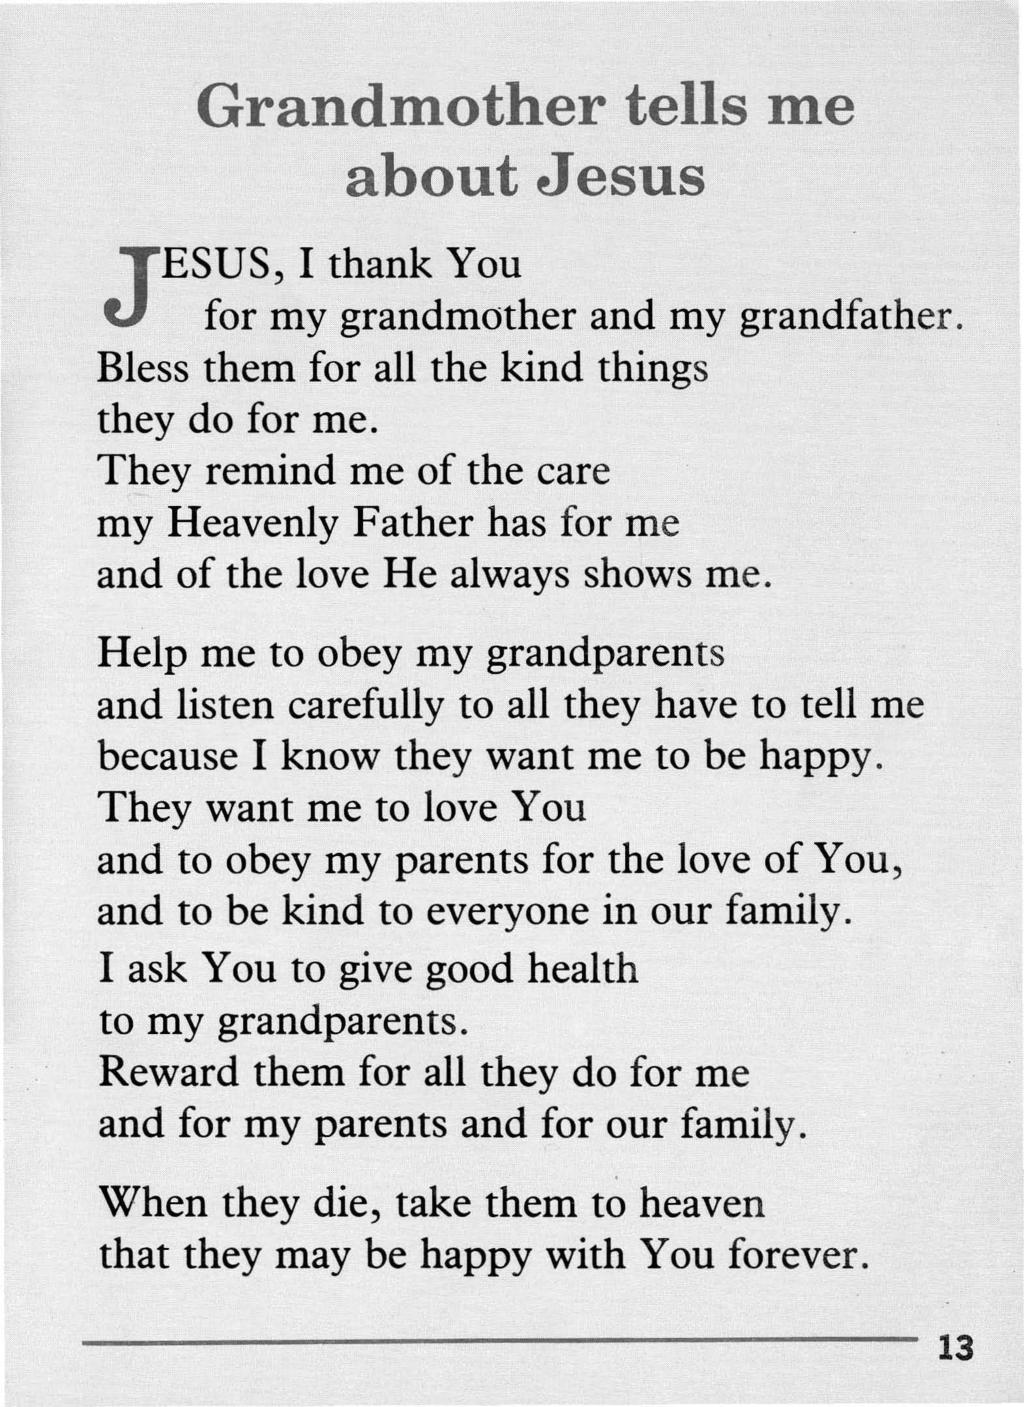 Grandmother tells me about Jesus JESUS, I thank You for my grandmother and my grandfather. Bless them for all the kind things they do for me.